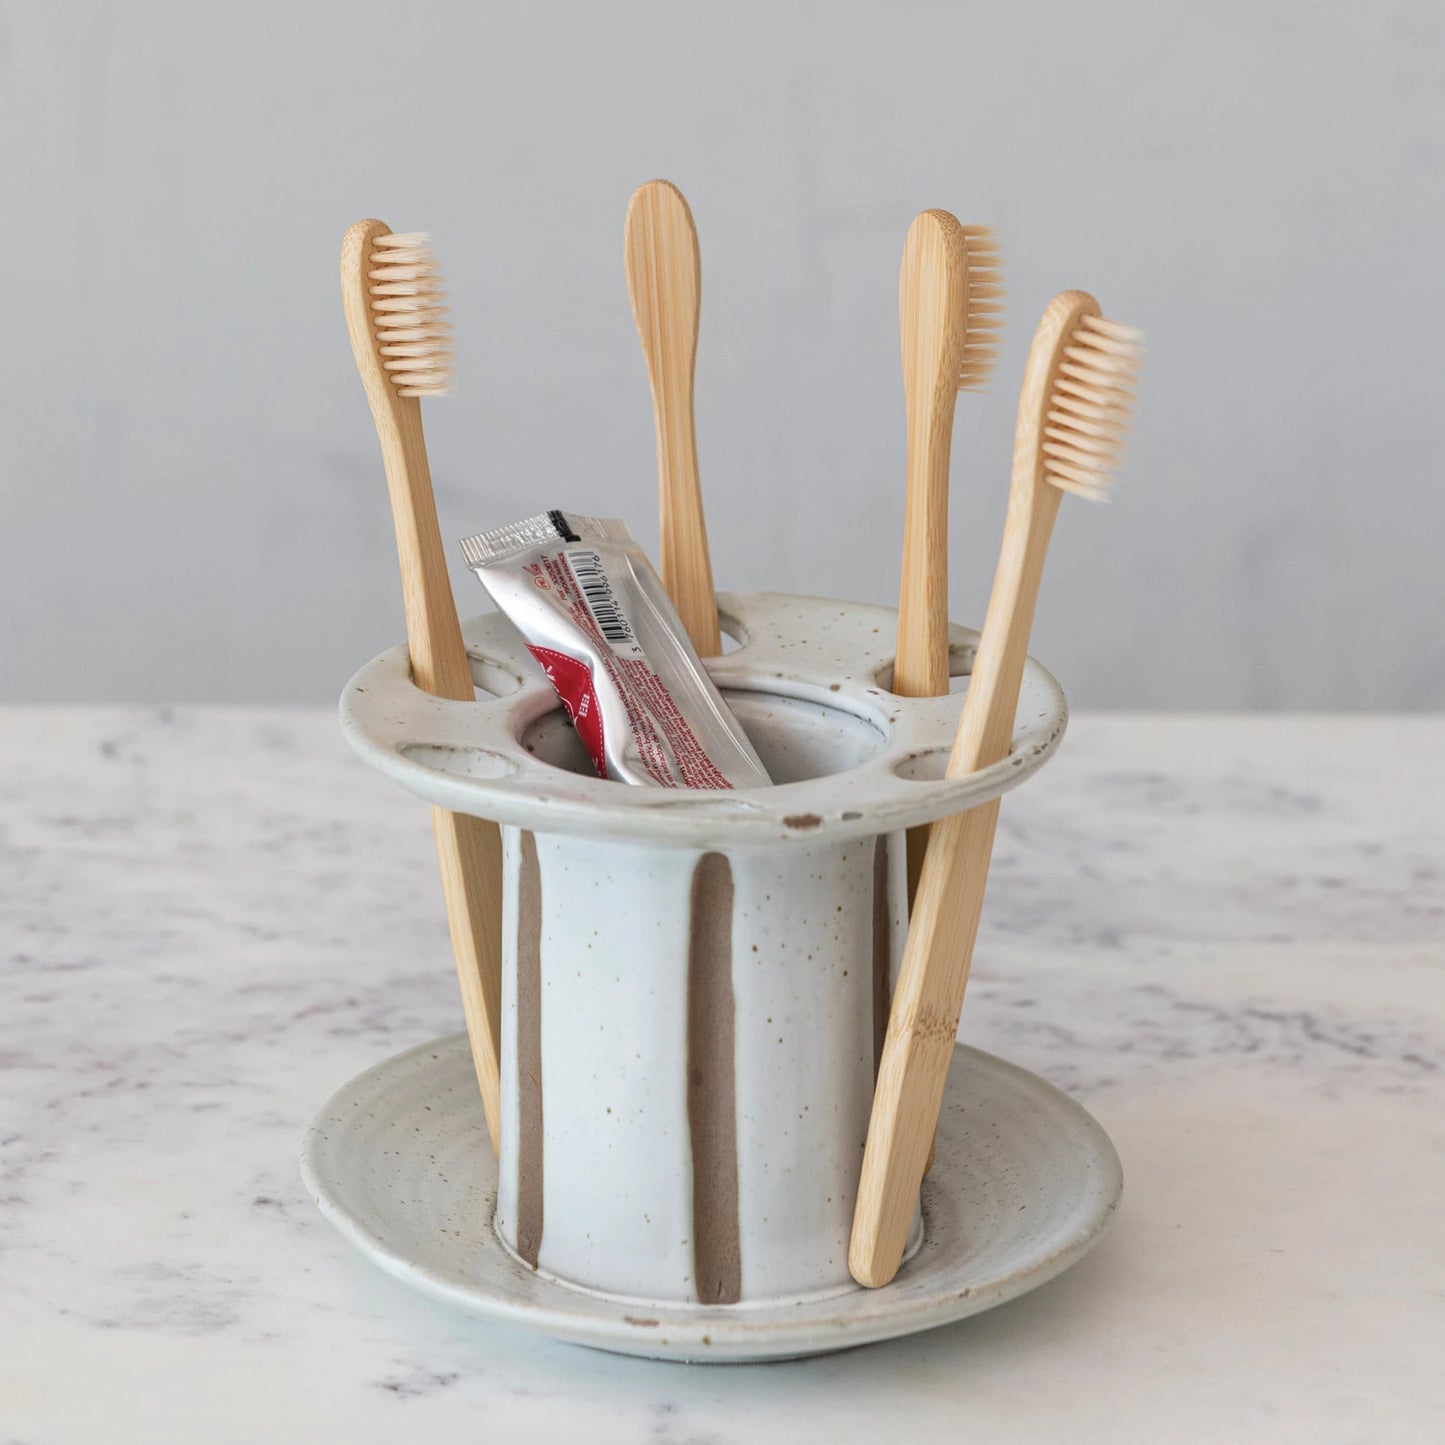 Stoneware Toothbrush Holder w/ Debossed Stripes, Reactive Glaze (Each One Will Vary)